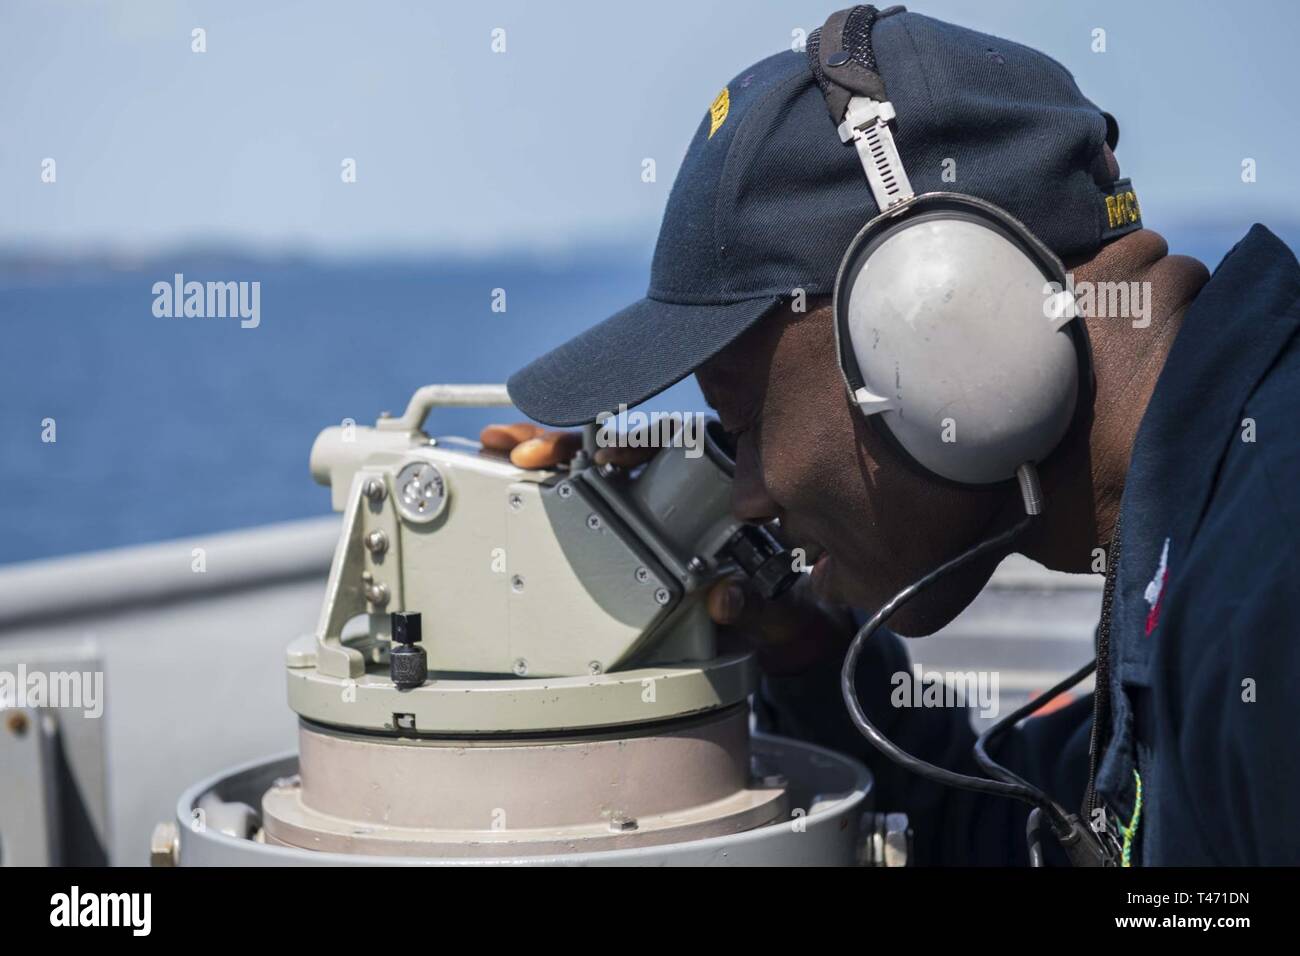 PHILIPPINE SEA (March 14, 2019) Personnel Specialist 1st Class Clement Aribisala tracks the ships bearing using a telescopic alidade as the Avenger-class mine countermeasures ship USS Pioneer (MCM 9) conducts a mine hunting training exercise. Pioneer, part of Mine Countermeasure Squadron 7, is operating in the U.S. 7th Fleet area of operations to enhance interoperability with partners and serve as a ready-response platform for contingency operations. Stock Photo